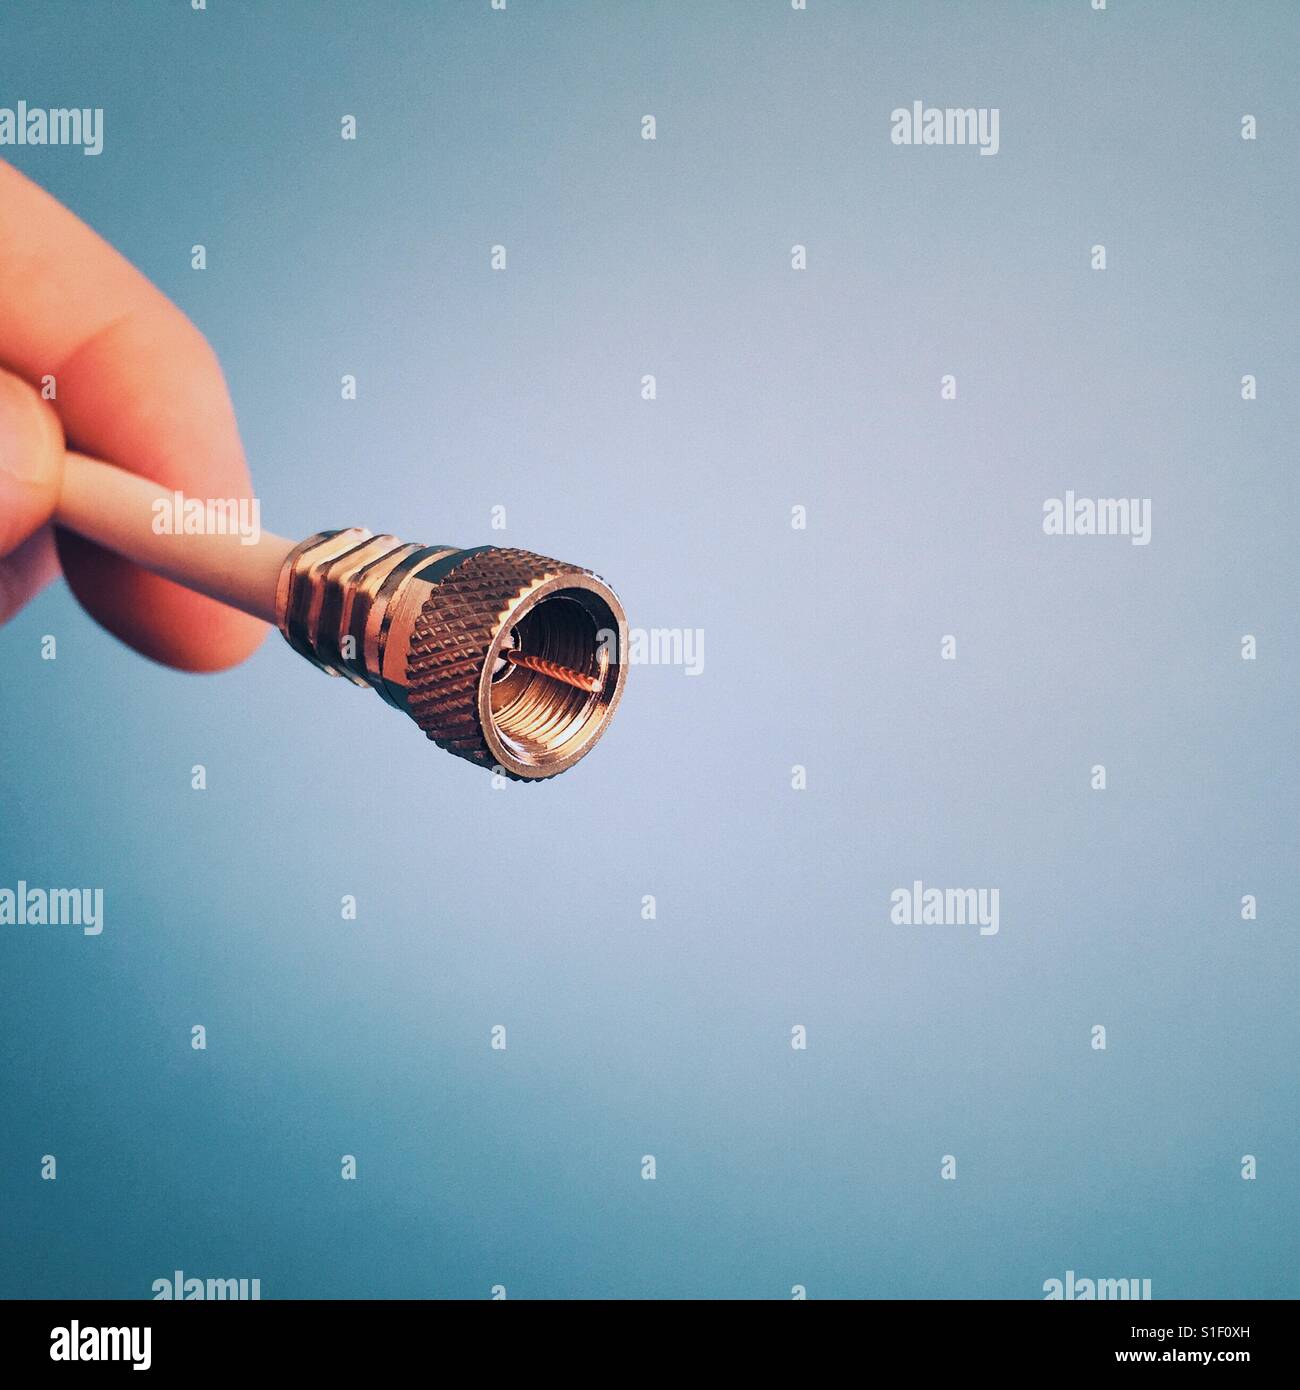 A man holding a coaxial television cable Stock Photo